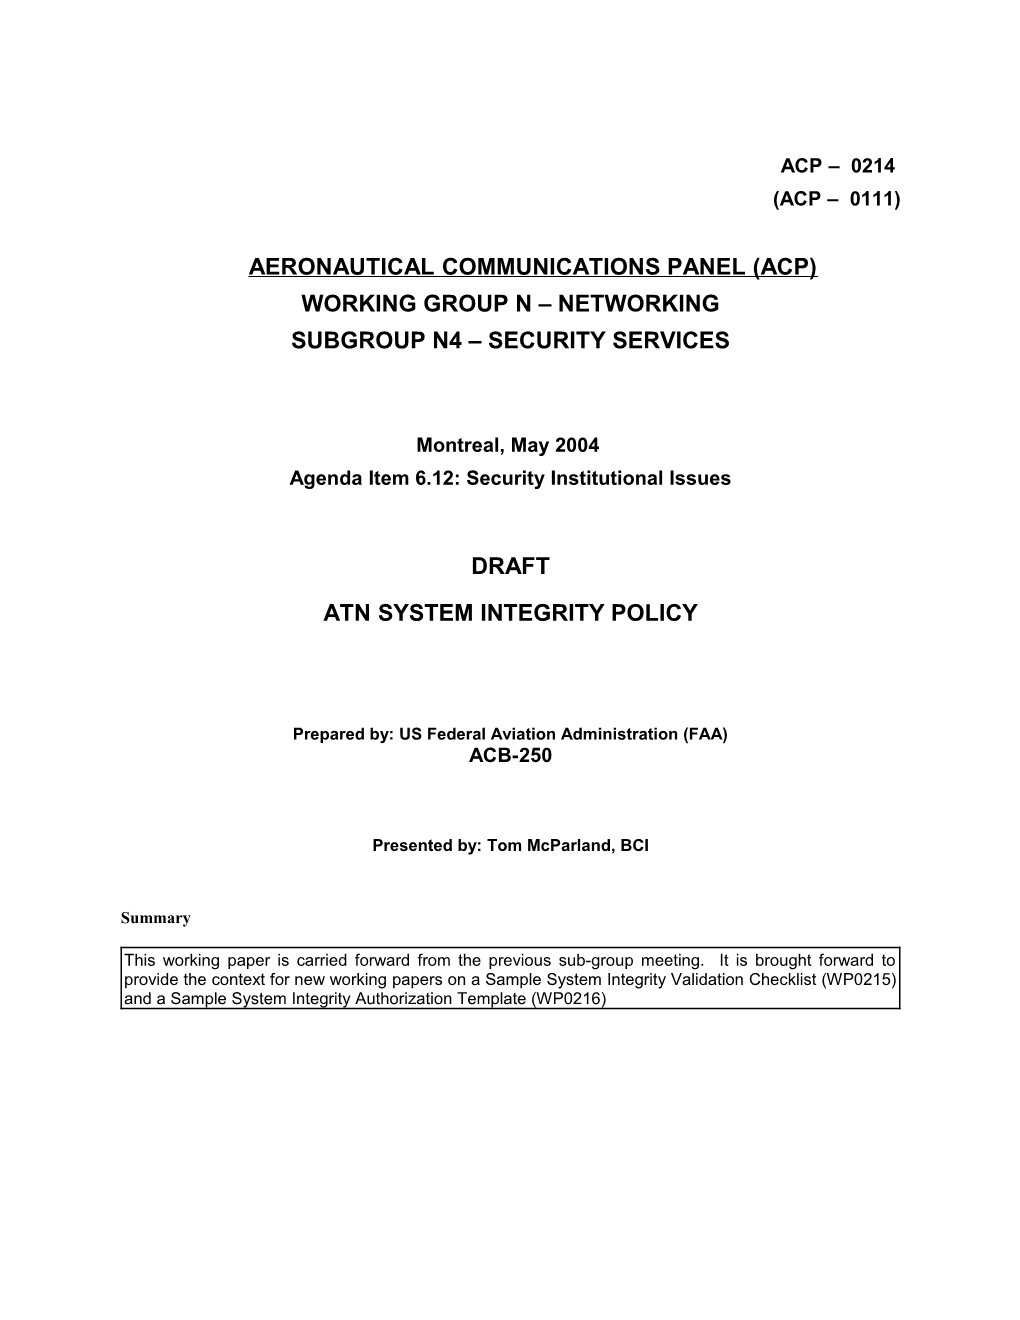 Draft ATN System Integrity Policy (WP0111)